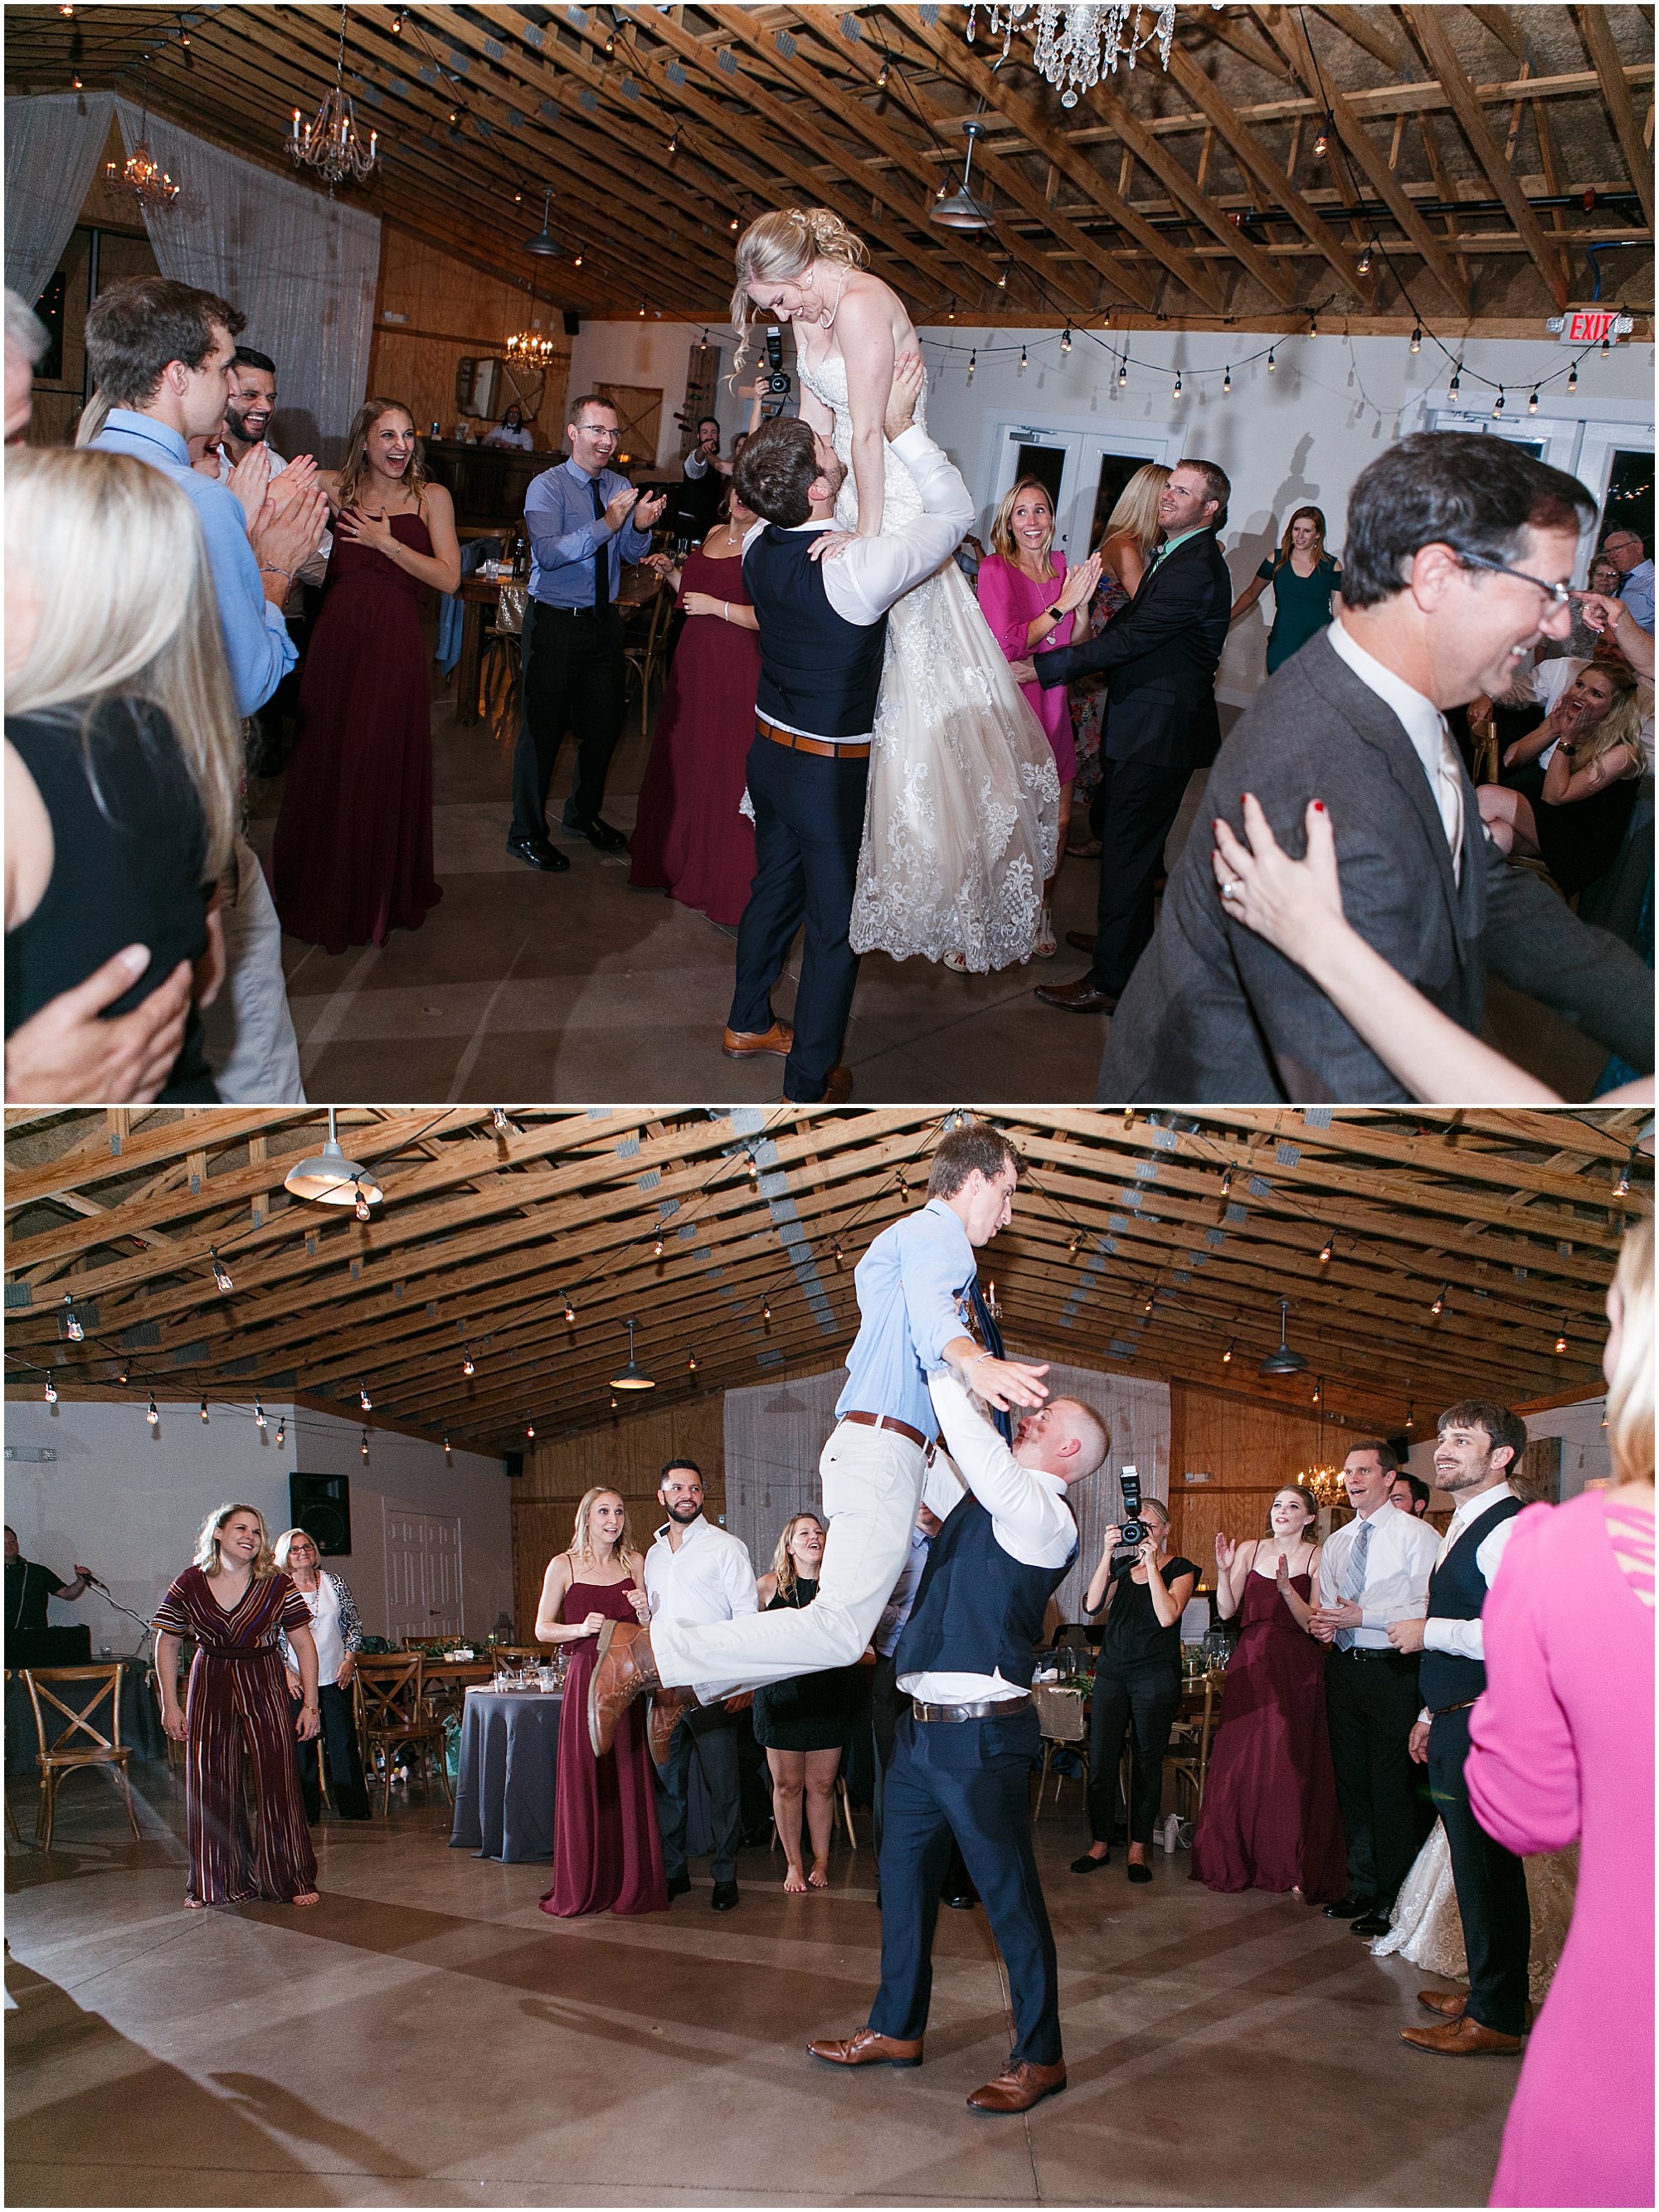 Groom lifting the bride and wedding guests copying them.